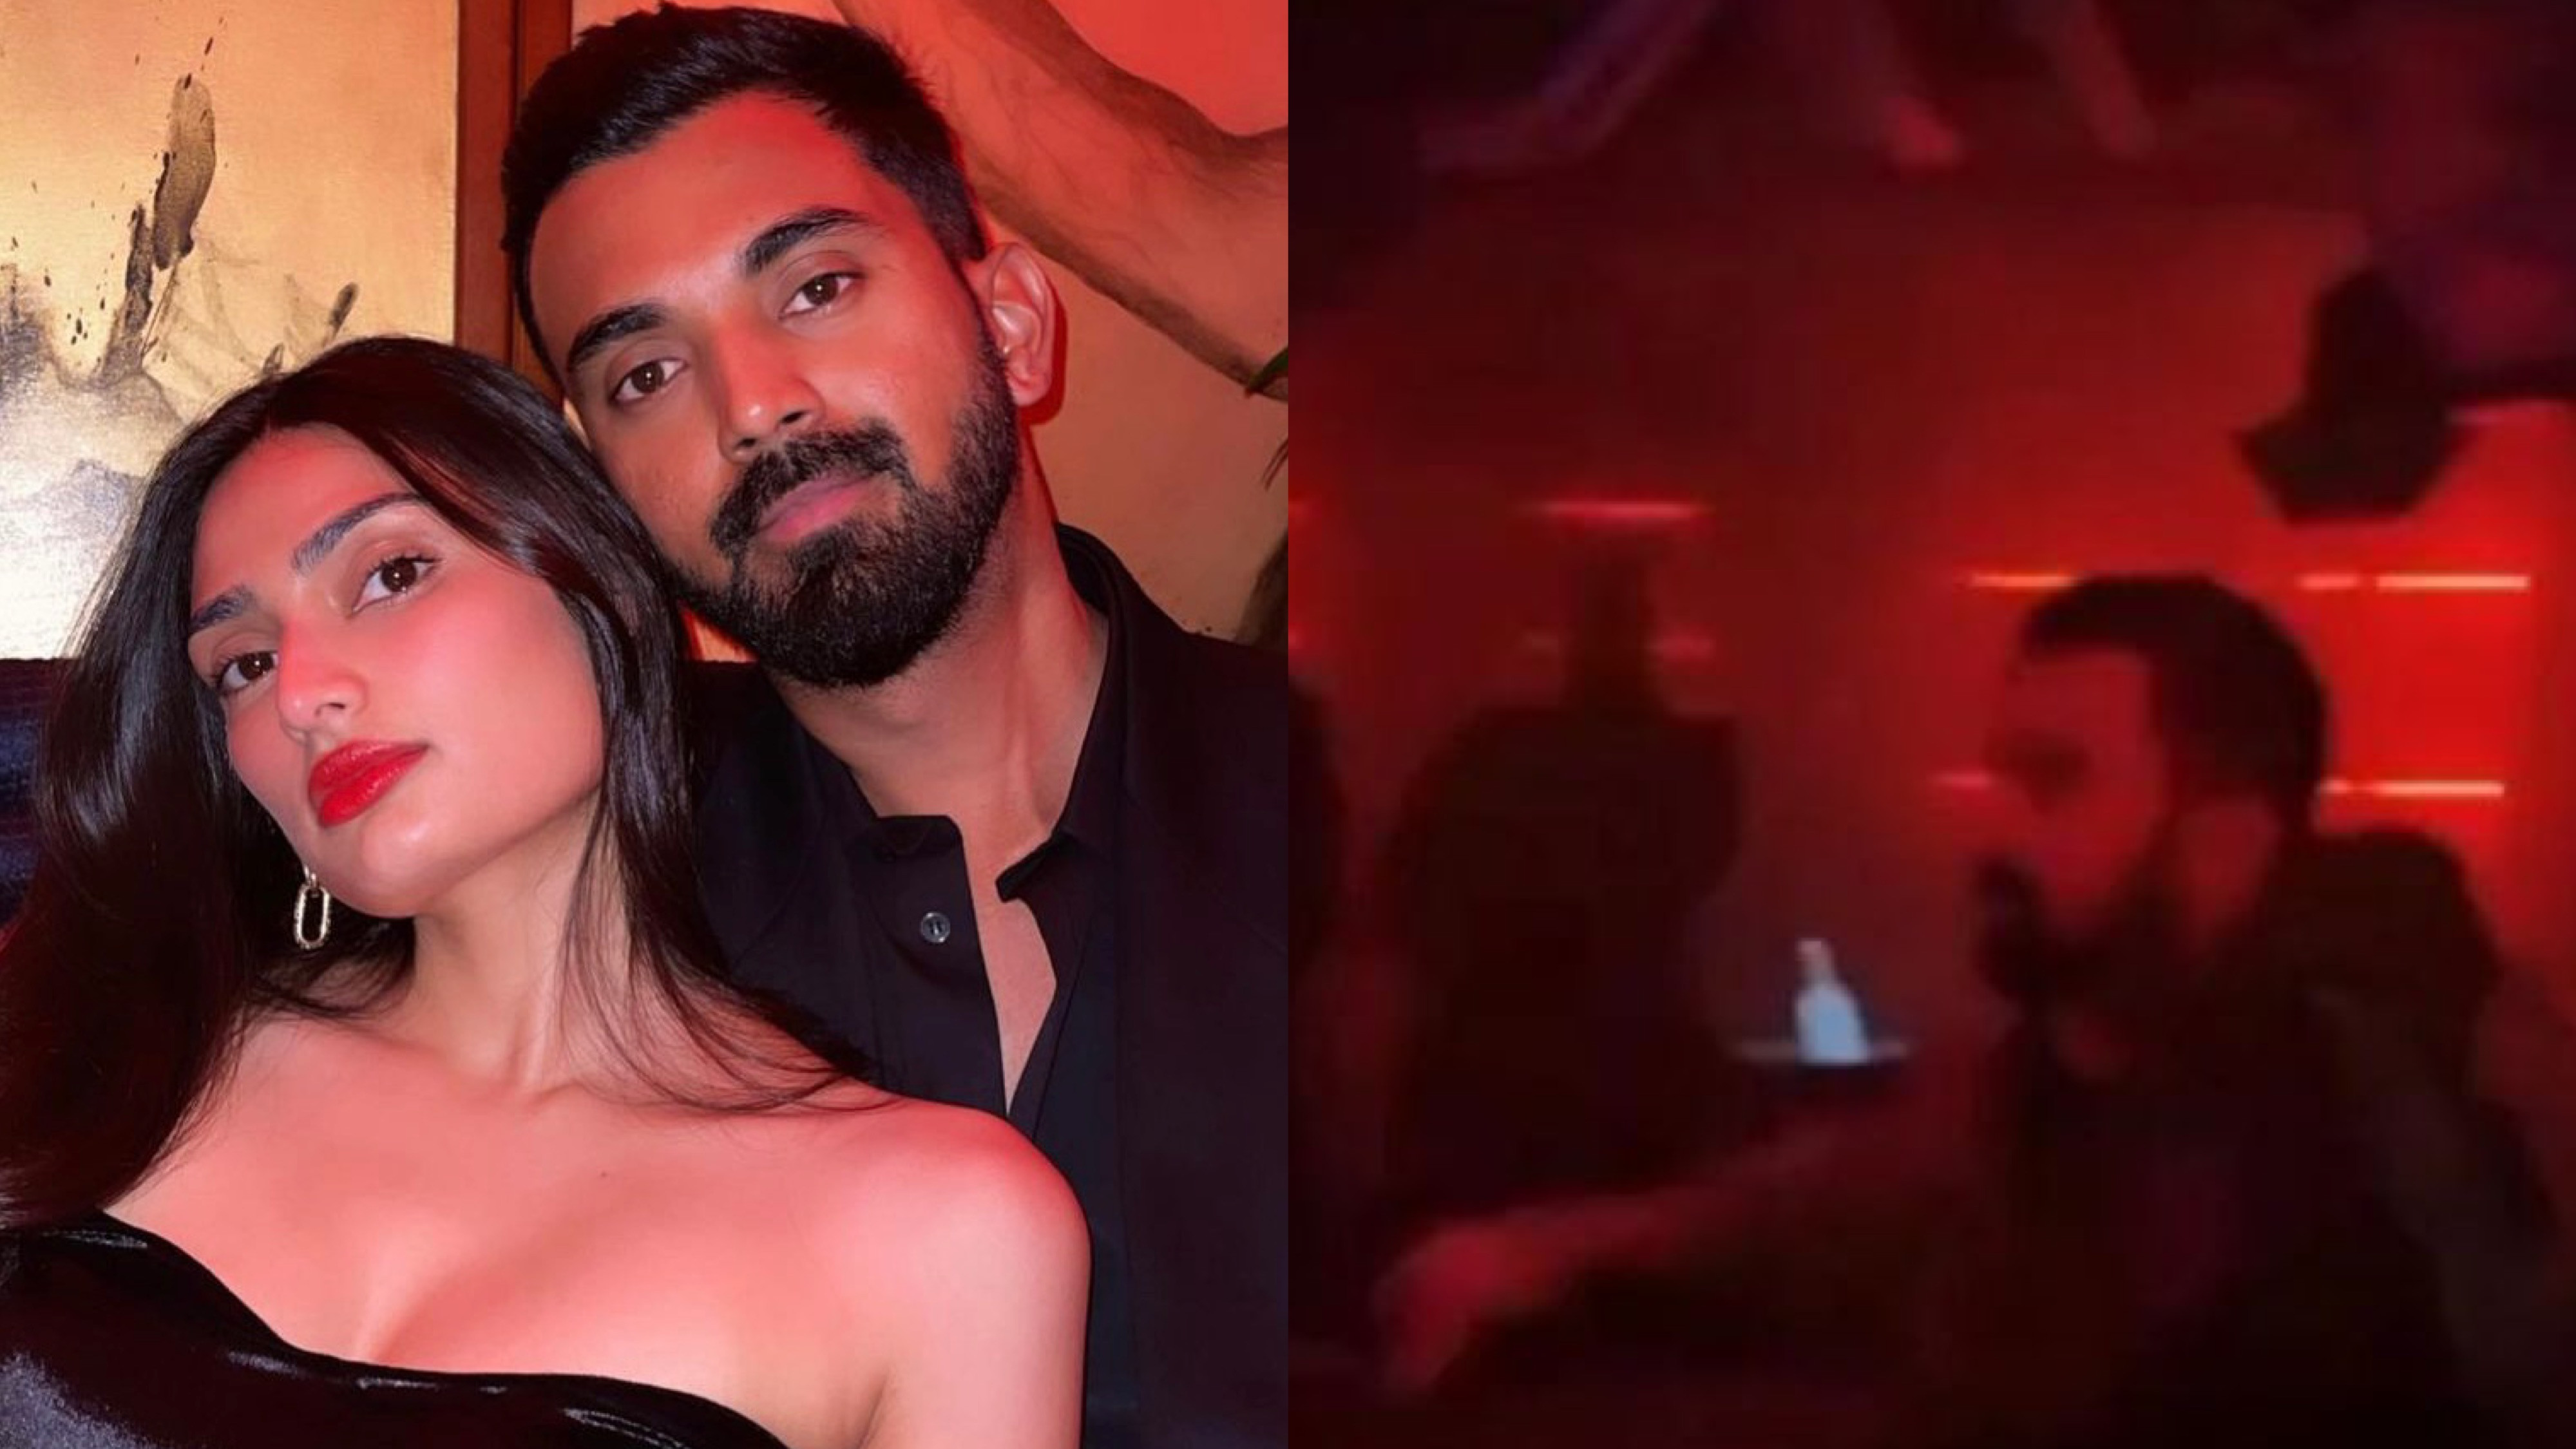 “Went out to a regular place,” Athiya Shetty clarifies after KL Rahul's clip at a adult-themed club goes viral